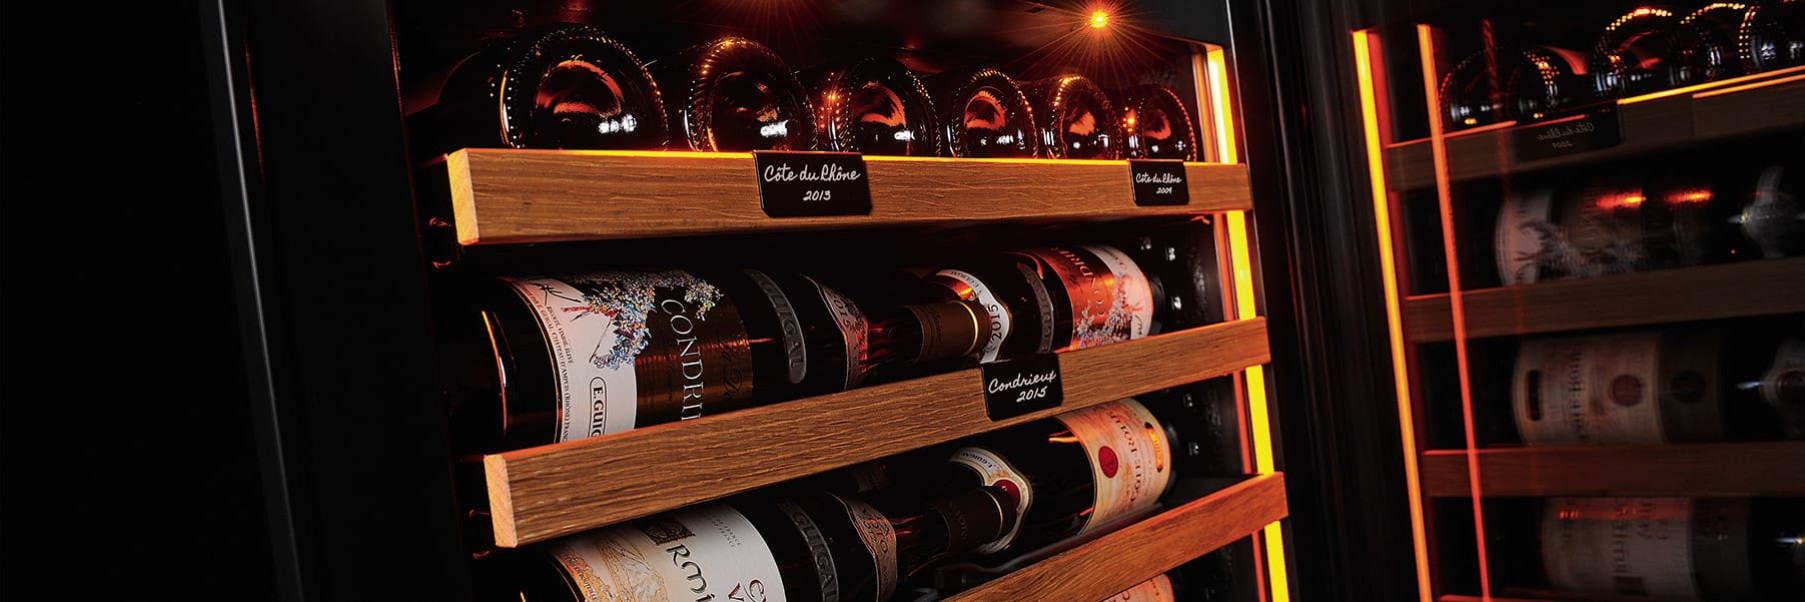 A neat presentation of wine bottles thanks to the integrated lighting and aesthetic shelves that allow you to organize the wines and highlight the labels.